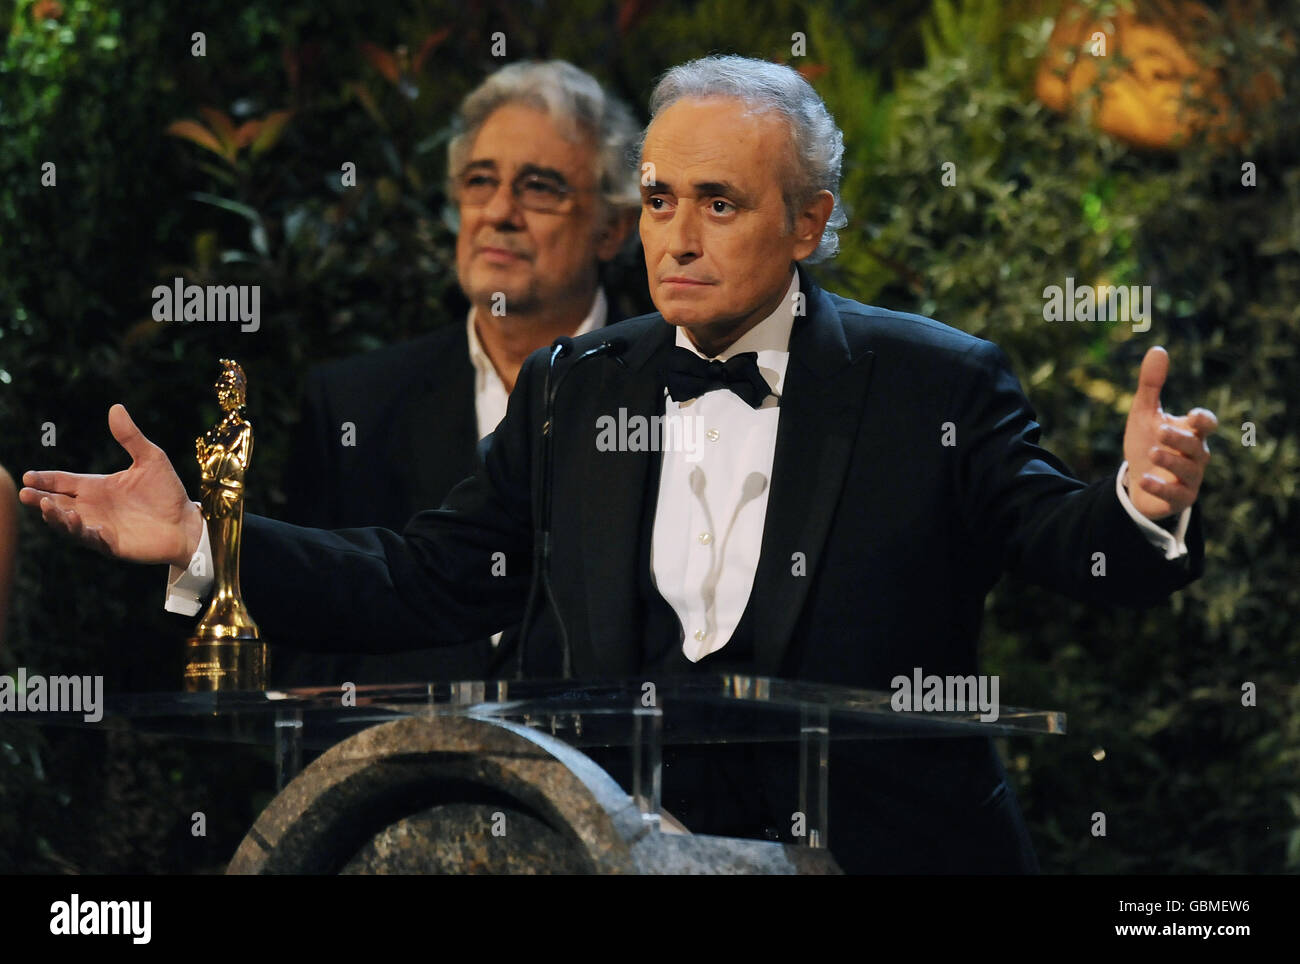 Spanish tenor Jose Carreras (R) stands next to opera singer Placido Domingo (L) as he makes a speech after receiving a Lifetime Achievement Award from the Duchess of Cornwall, during the Classical Brit Awards at the Royal Albert Hall in London. Stock Photo